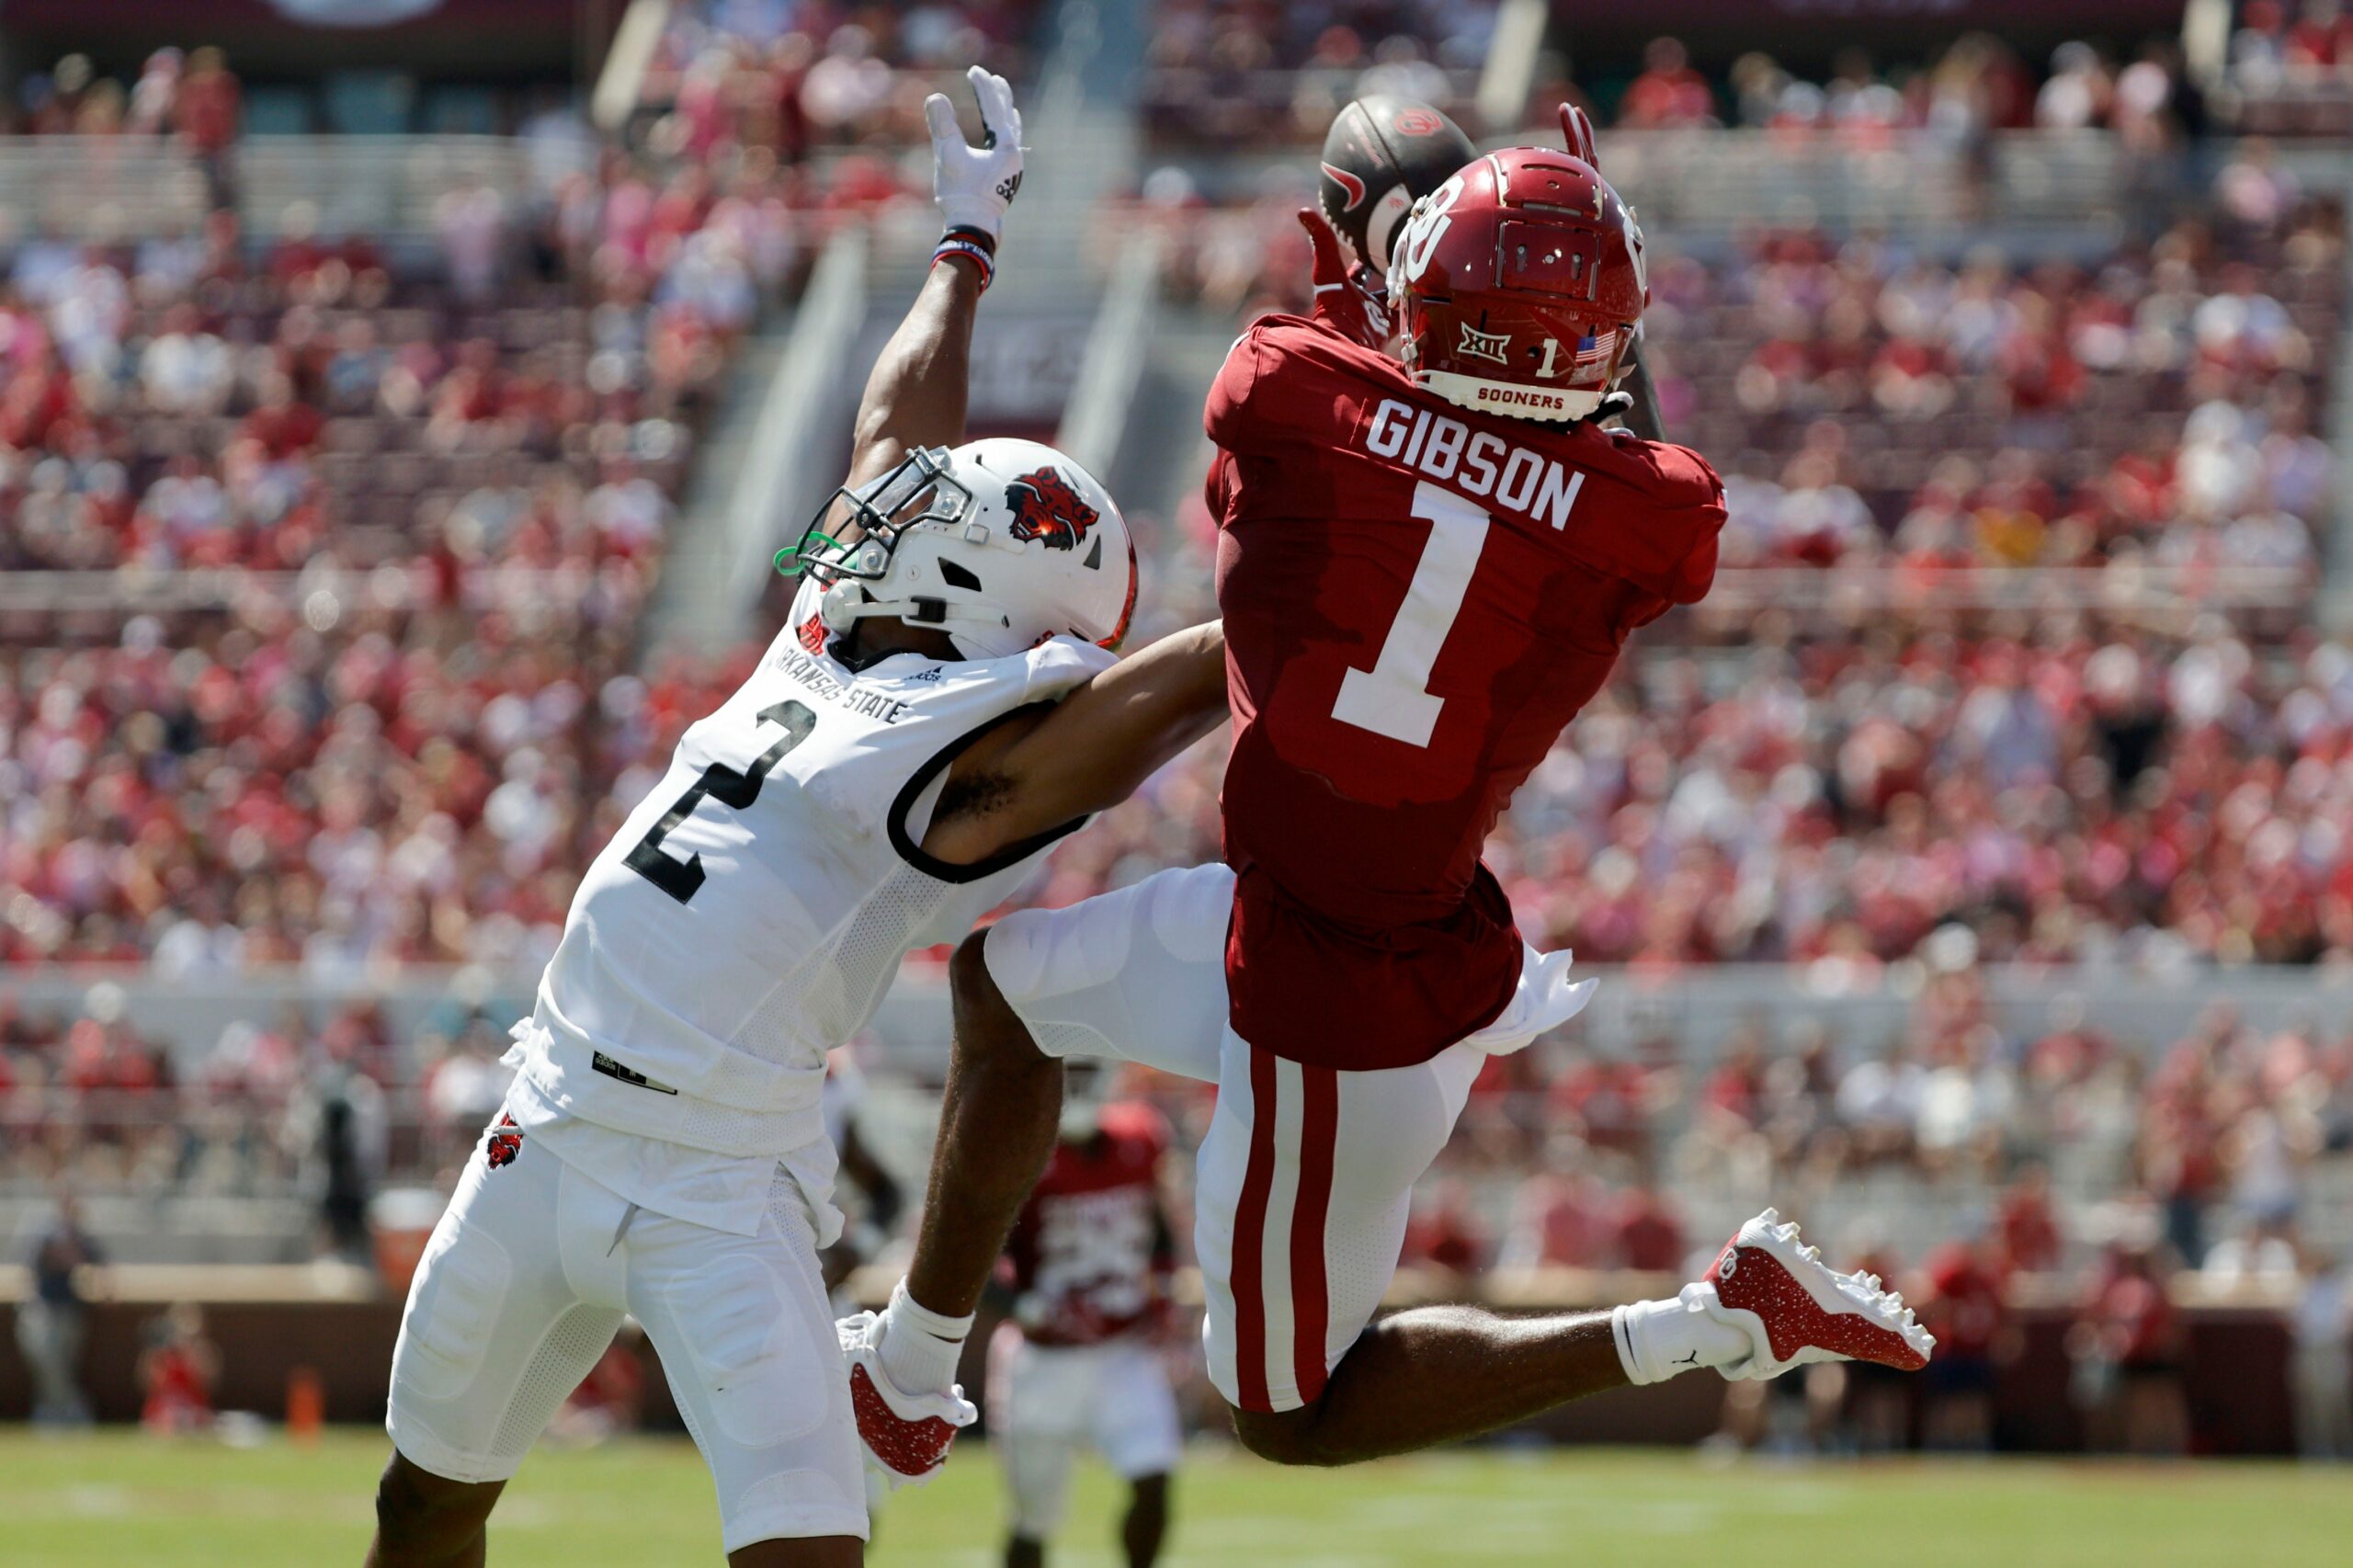 5 takeaways from Oklahoma’s dominant 73-0 win over Arkansas State